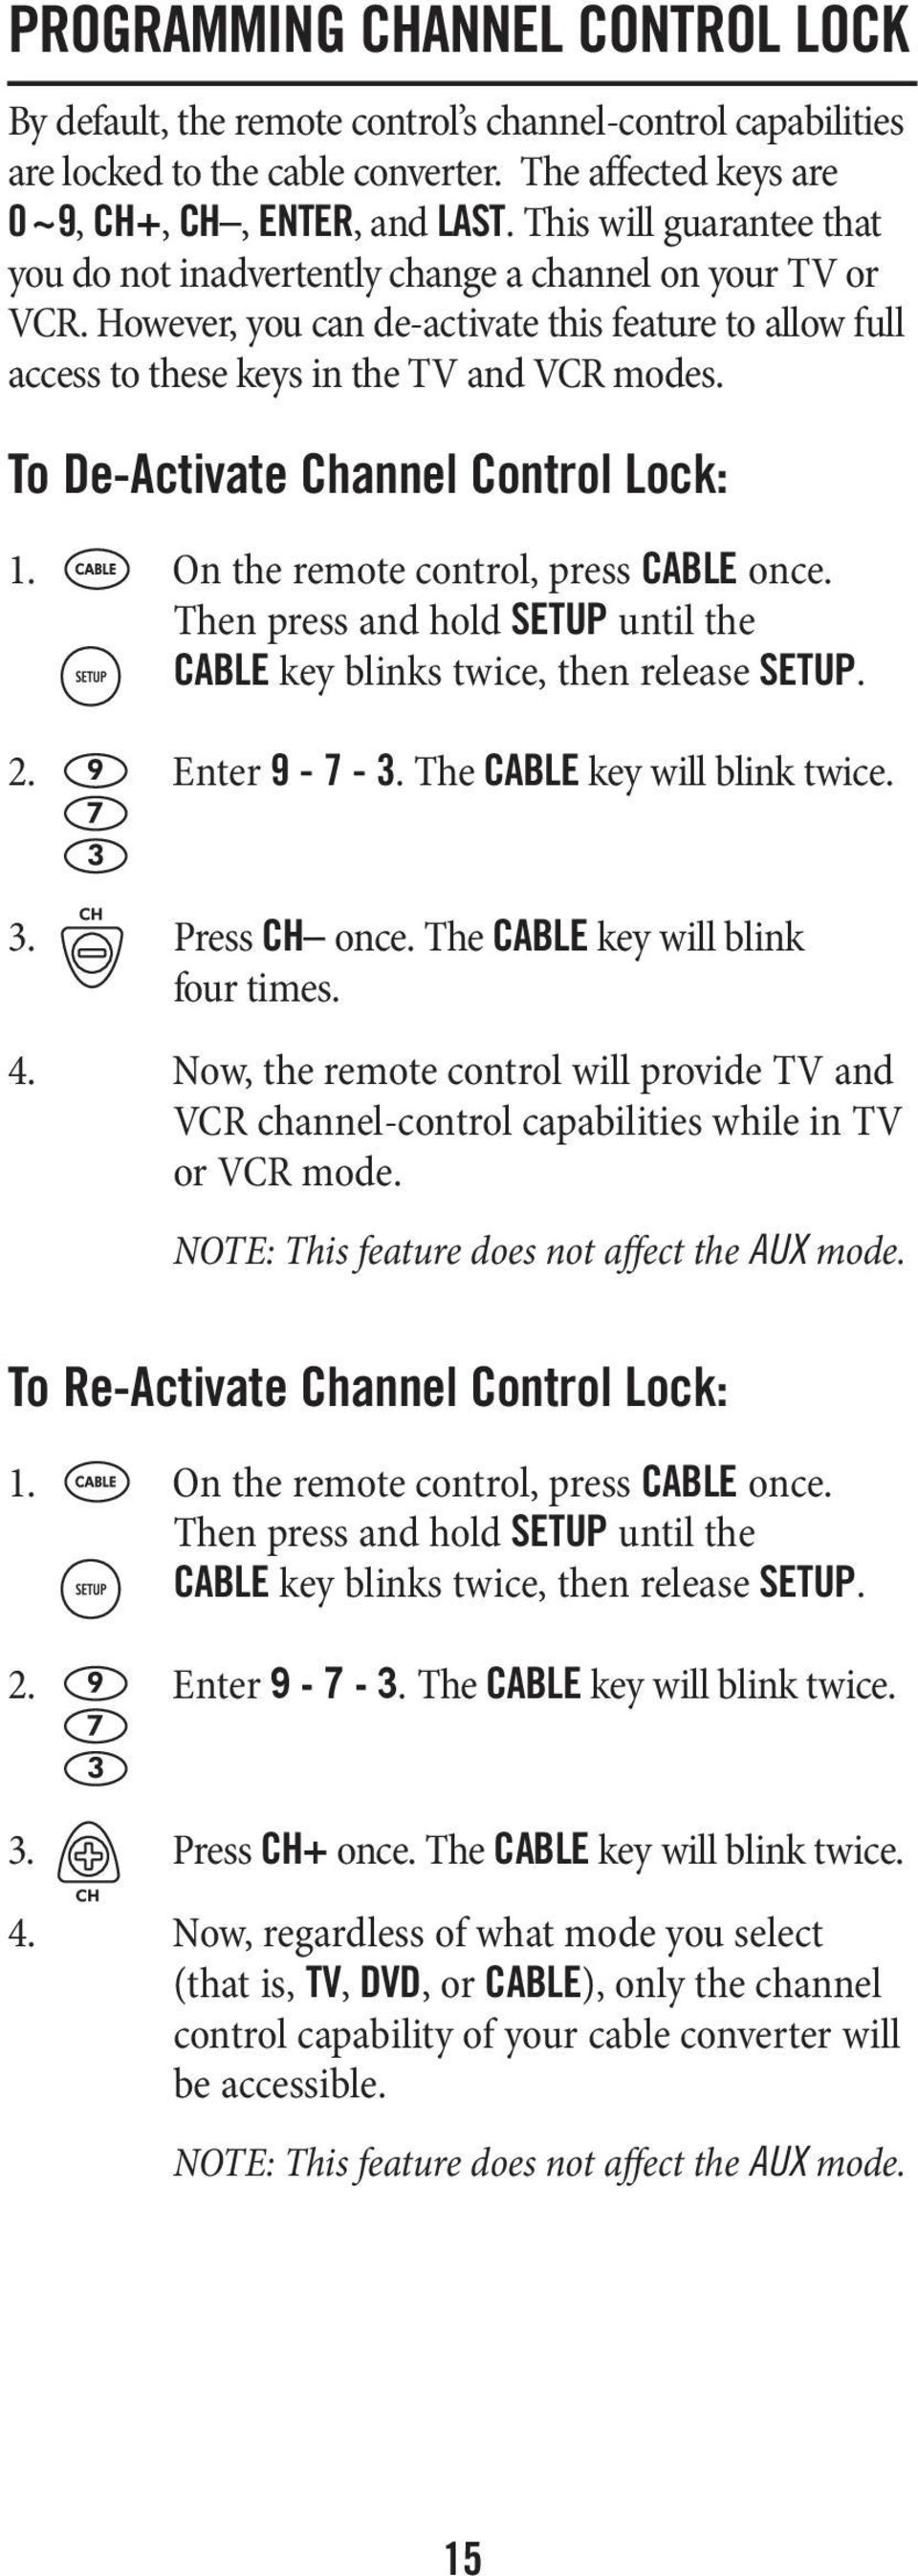 To De-Activate Channel Control Lock: 1. On the remote control, press CABLE once. Then press and hold SETUP until the CABLE key blinks twice, then release SETUP. 2. Enter 9-7 - 3.